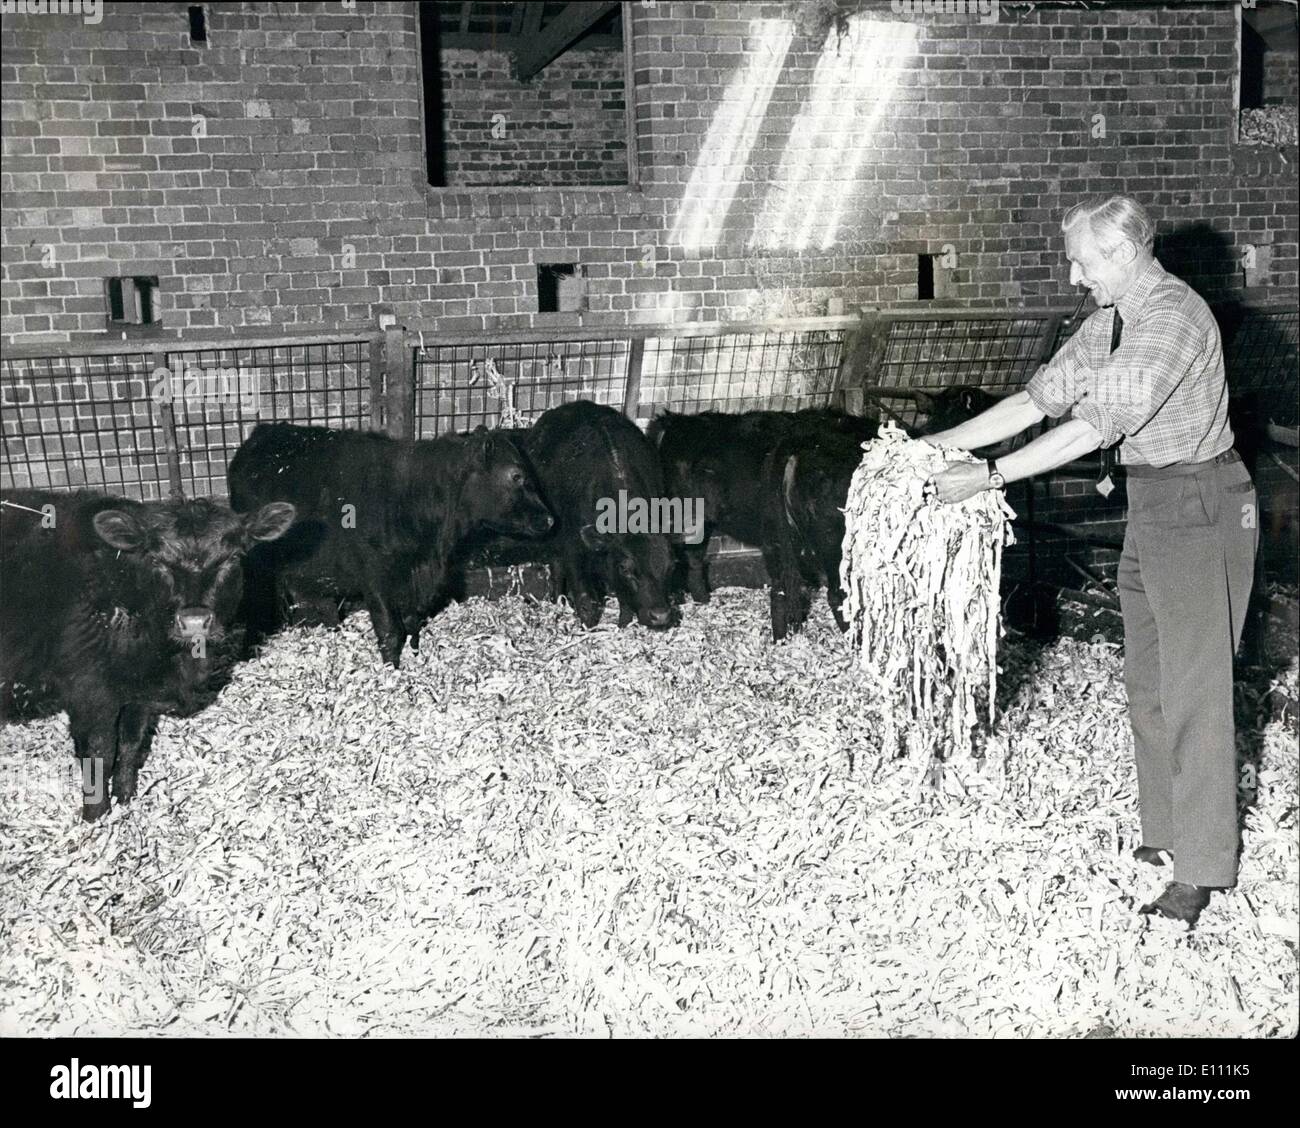 Apr. 04, 1975 - Shortage Of Straw -So Cattle Bed Down On Paper: A Devon farmer, Mr. T. Lawson, of Bovey Tracey, laying a bedding of Shredded newspapers for his cattle because ofg the shortage of straw. One bale of paper spreads as far as two bales of straw. Stock Photo